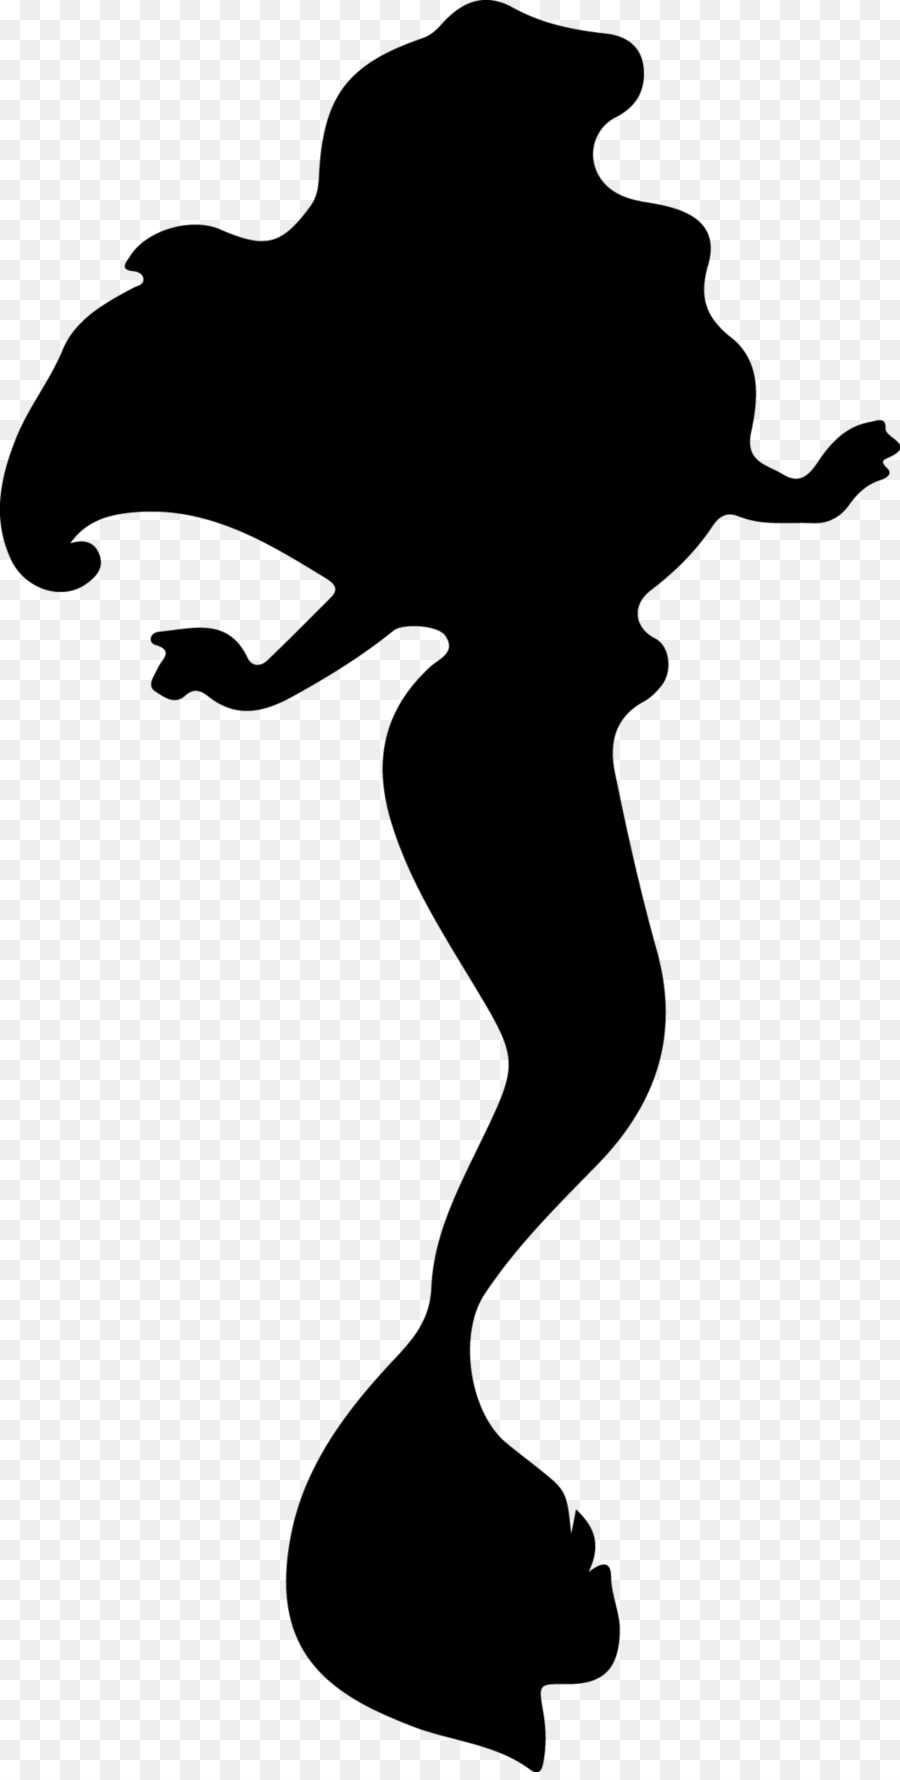 Silhouette Long hair Woman Clip art - Silhouette png download - 1280*1280 -  Free Transparent Silhouette png Download. - Clip Art Library